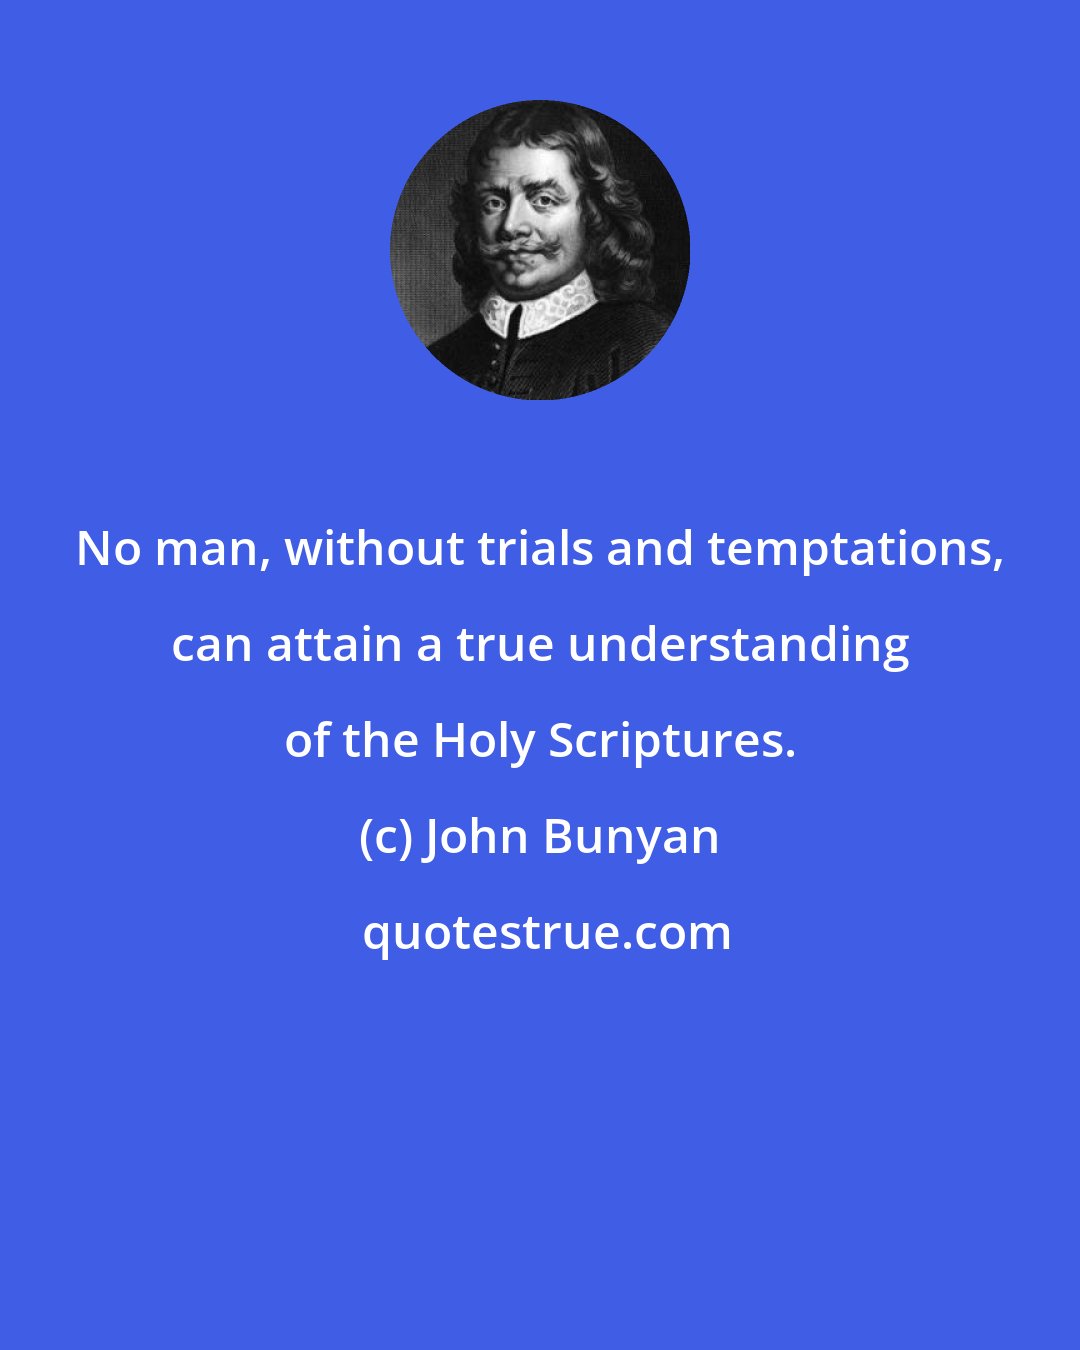 John Bunyan: No man, without trials and temptations, can attain a true understanding of the Holy Scriptures.